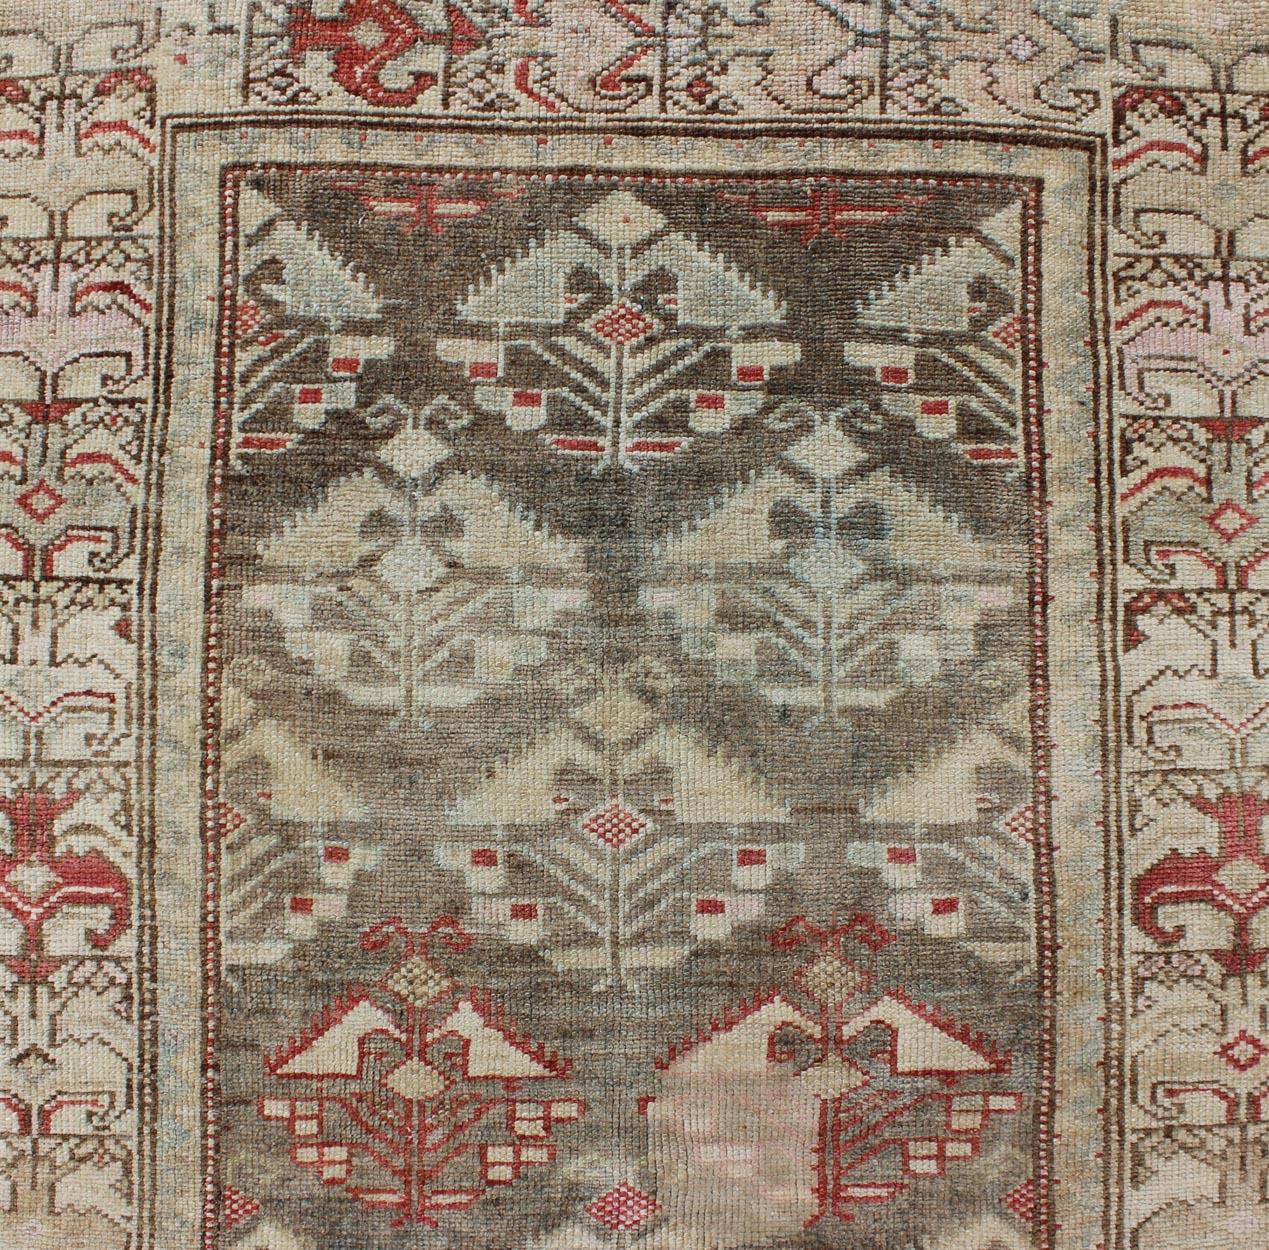 Mid-20th Century Antique Persian Kurdish Runner with Repeating Geometric in Gray Green, Neutrals